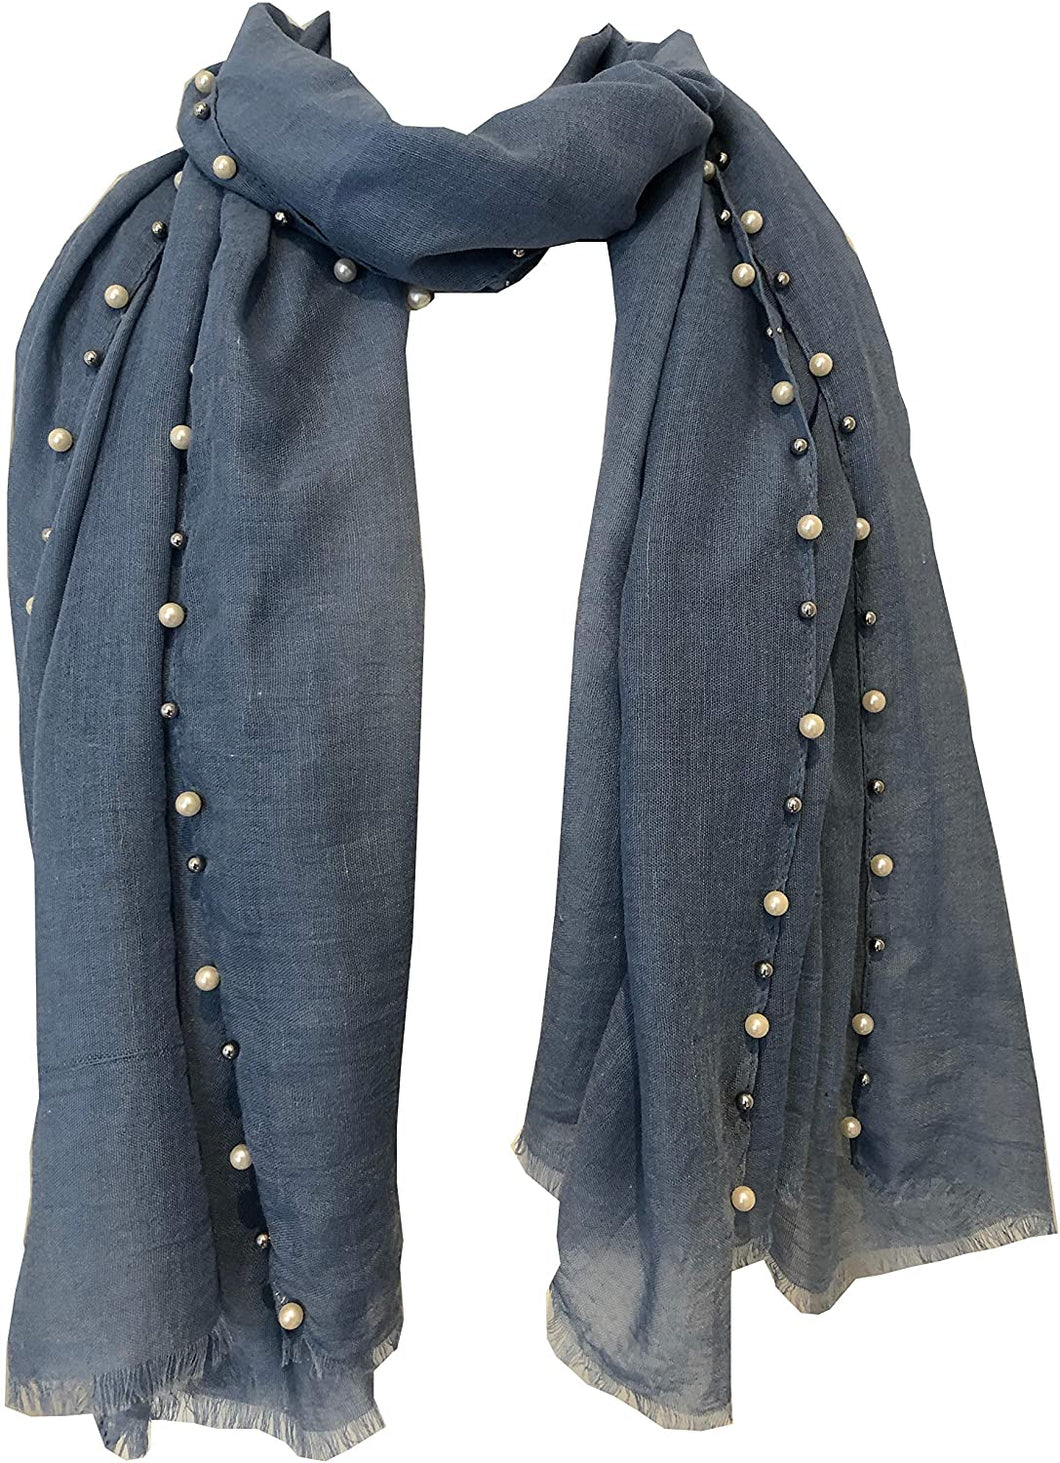 Pamper Yourself Now Denim Blue with Beads and Pearls with Frayed Edge Long Soft Scarf/wrap